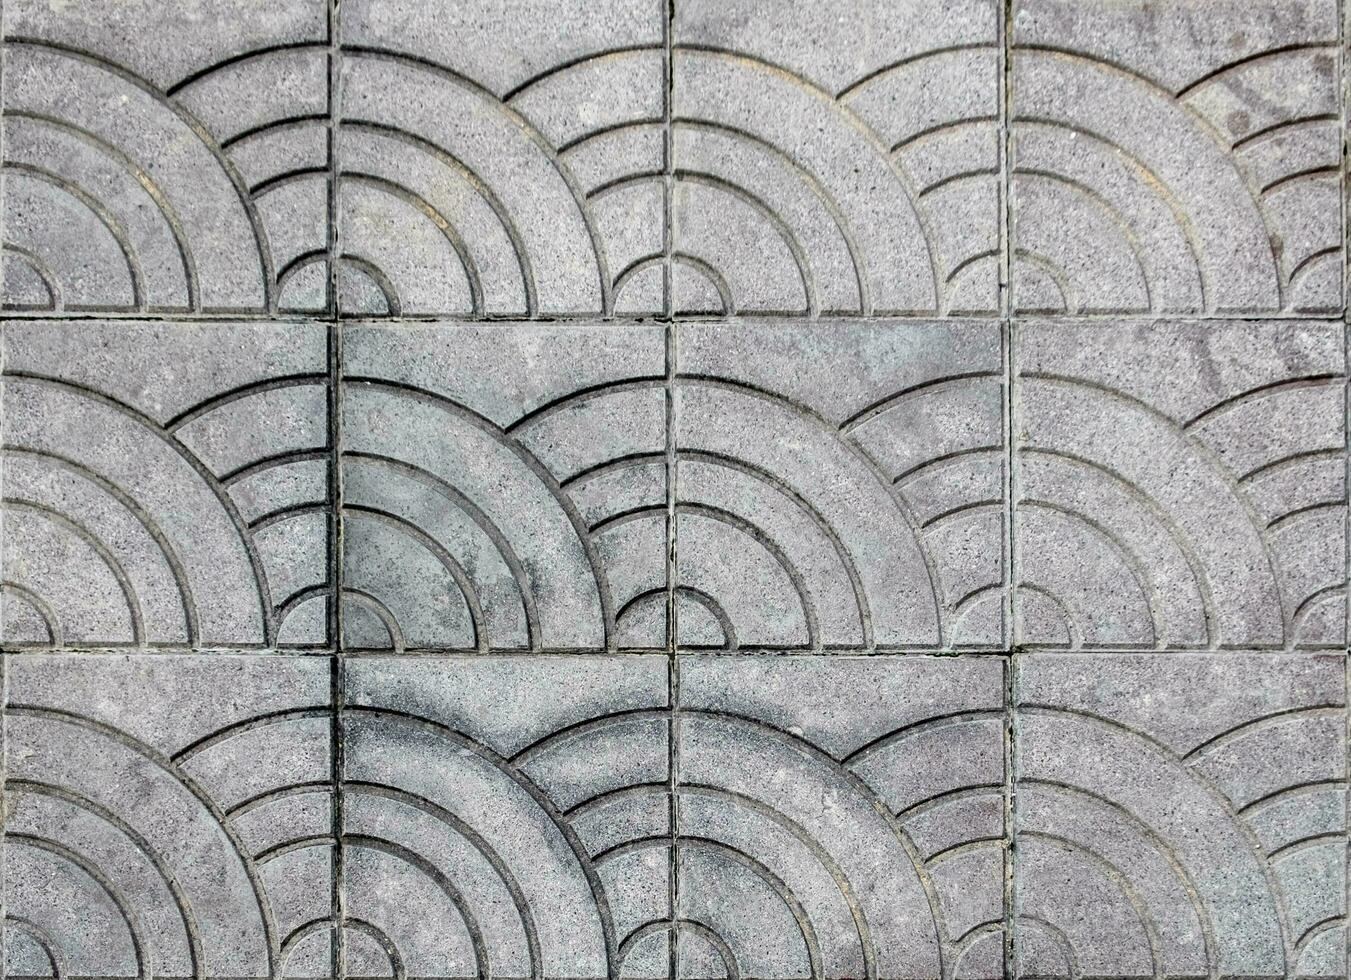 Tiles mortar stone striped tracery floor photo